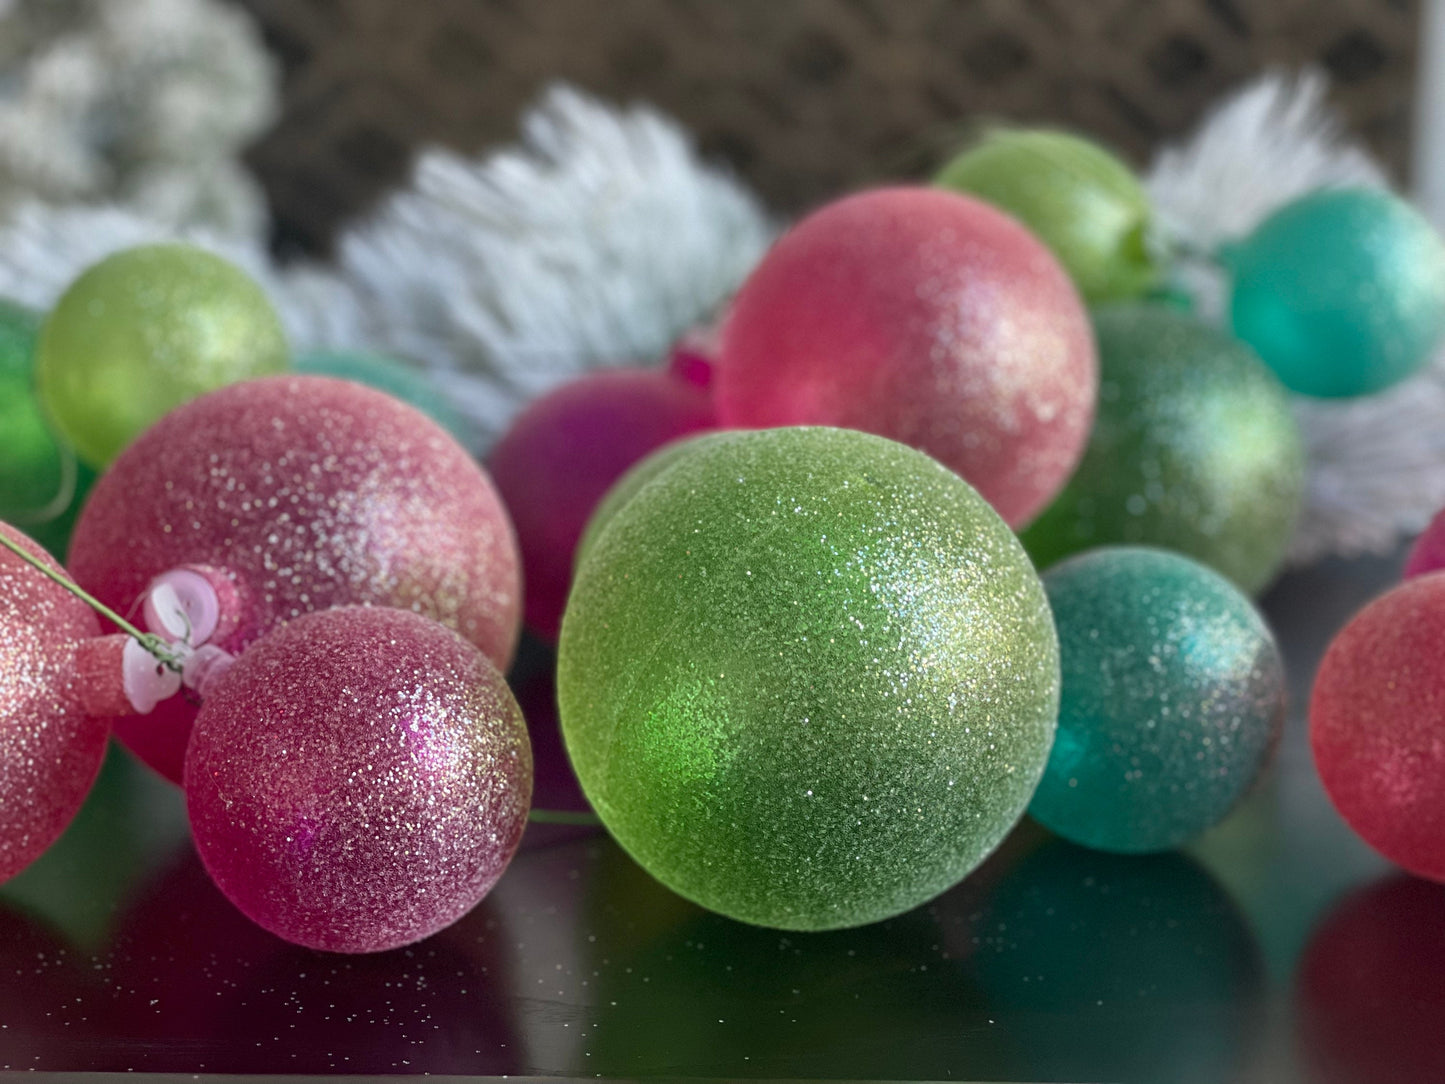 6 ft ball multicolor ball garland. Pastel color garland. Sugared garland. Candy theme. Christmas. Party.